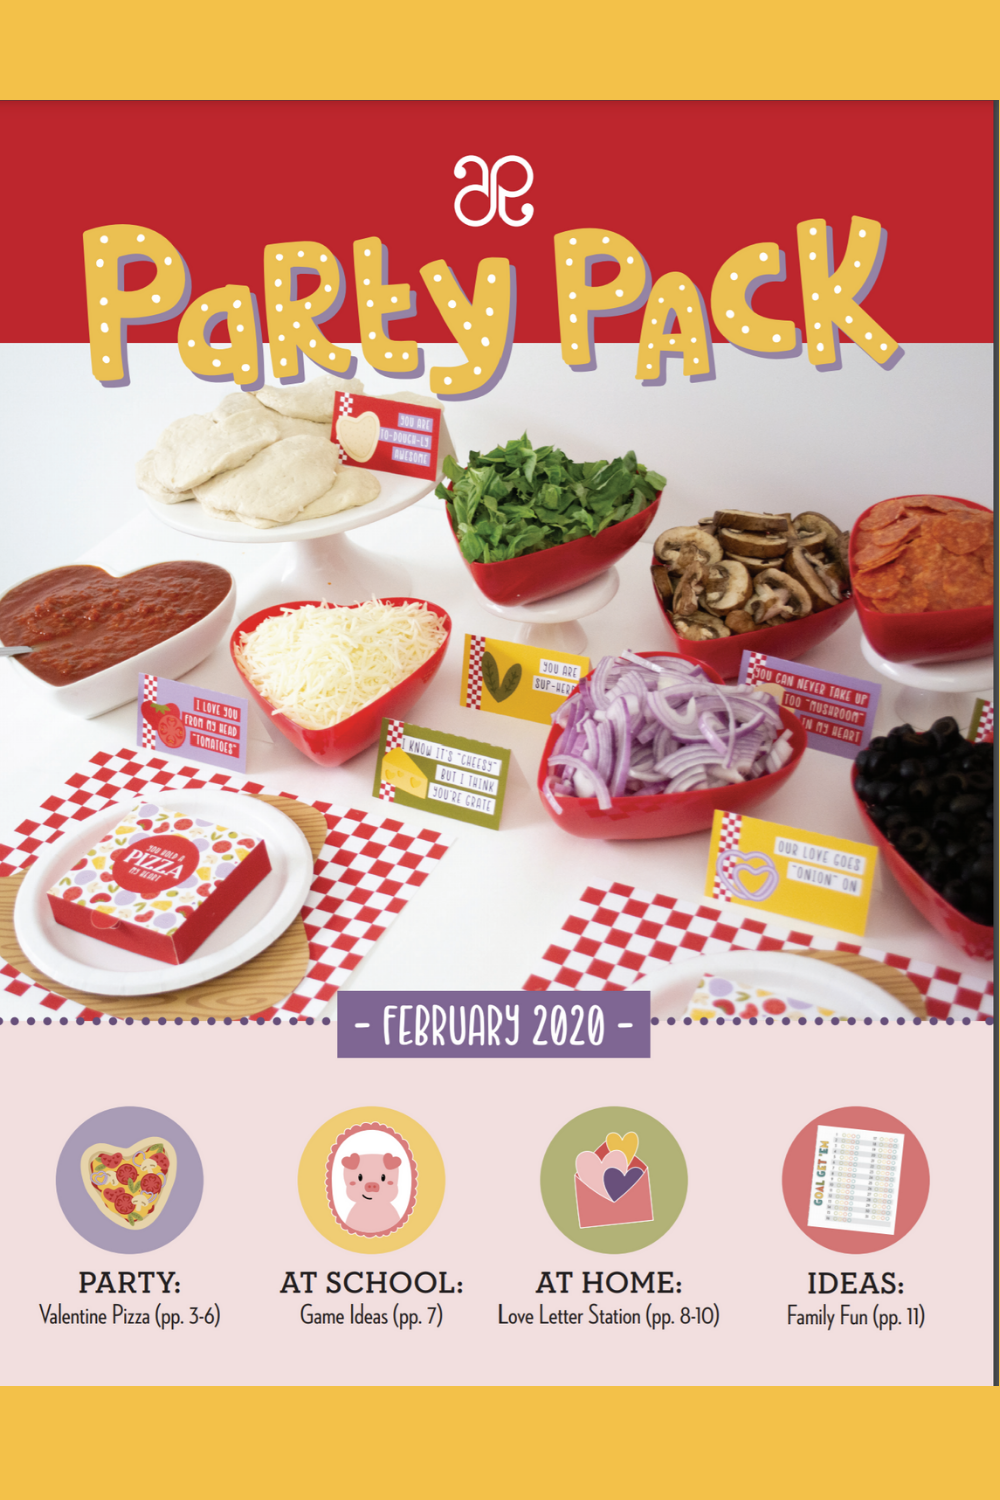 This Party Pack is a “You Hold a Pizza My Heart” pizza party that’s perfect for Valentine’s Day. A collection of crafts, activities, and games make up this You Hold a Pizza My Heart Party Pack.